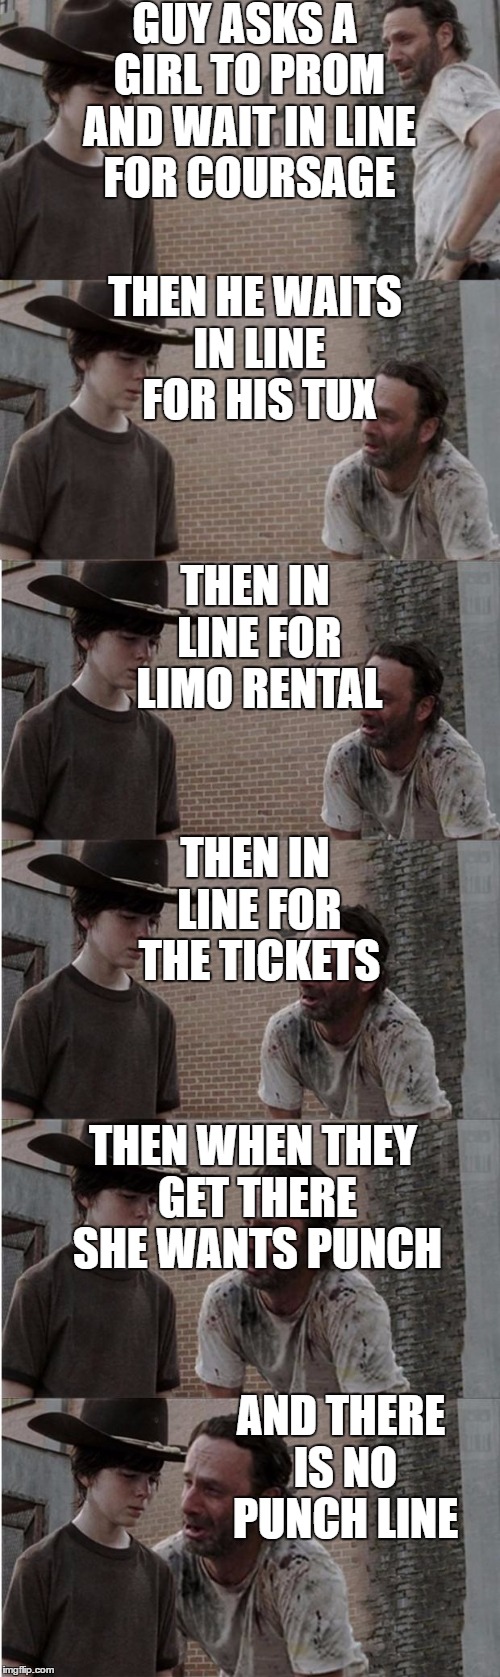 Rick and Carl Longer | GUY ASKS A GIRL TO PROM AND WAIT IN LINE FOR COURSAGE; THEN HE WAITS IN LINE FOR HIS TUX; THEN IN LINE FOR LIMO RENTAL; THEN IN LINE FOR THE TICKETS; THEN WHEN THEY GET THERE SHE WANTS PUNCH; AND THERE IS NO PUNCH LINE | image tagged in memes,rick and carl longer | made w/ Imgflip meme maker